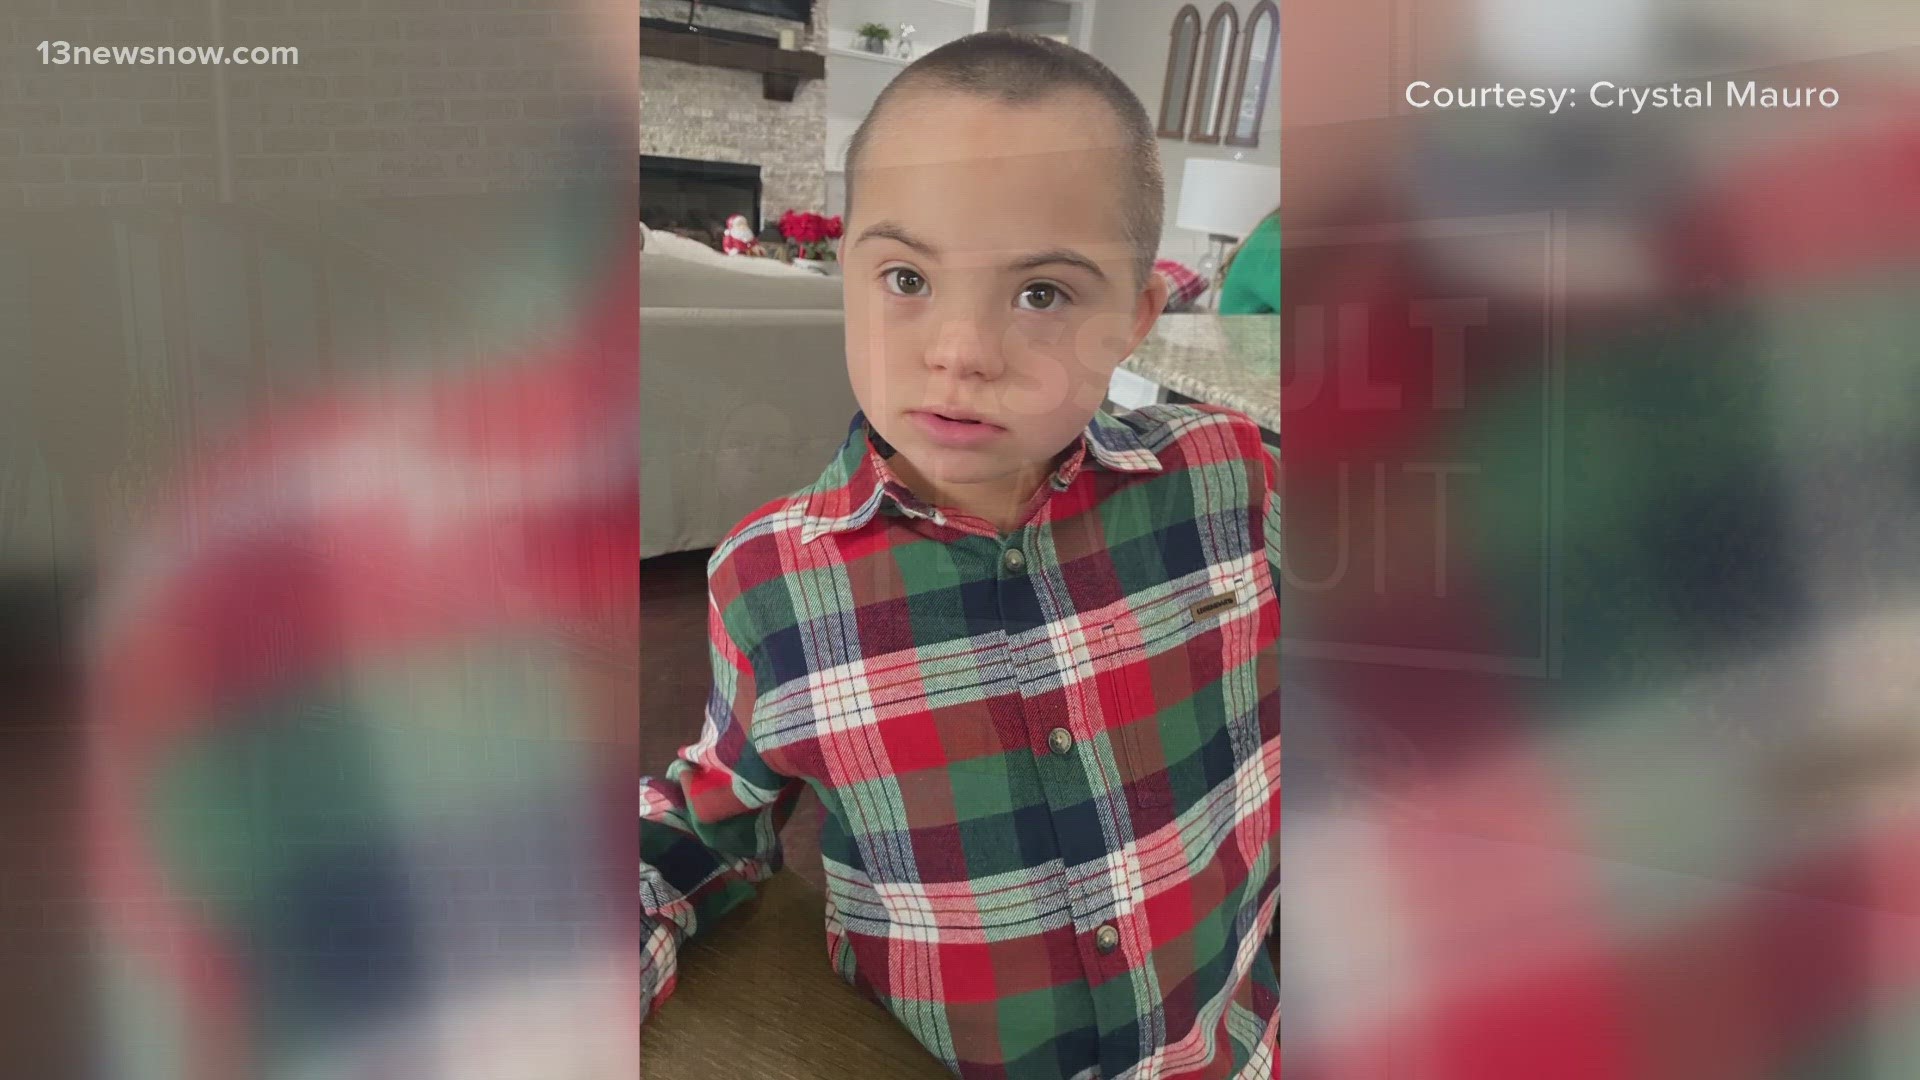 Virginia Beach parents are seeking justice nearly one year after their son was reportedly assaulted on a school bus.